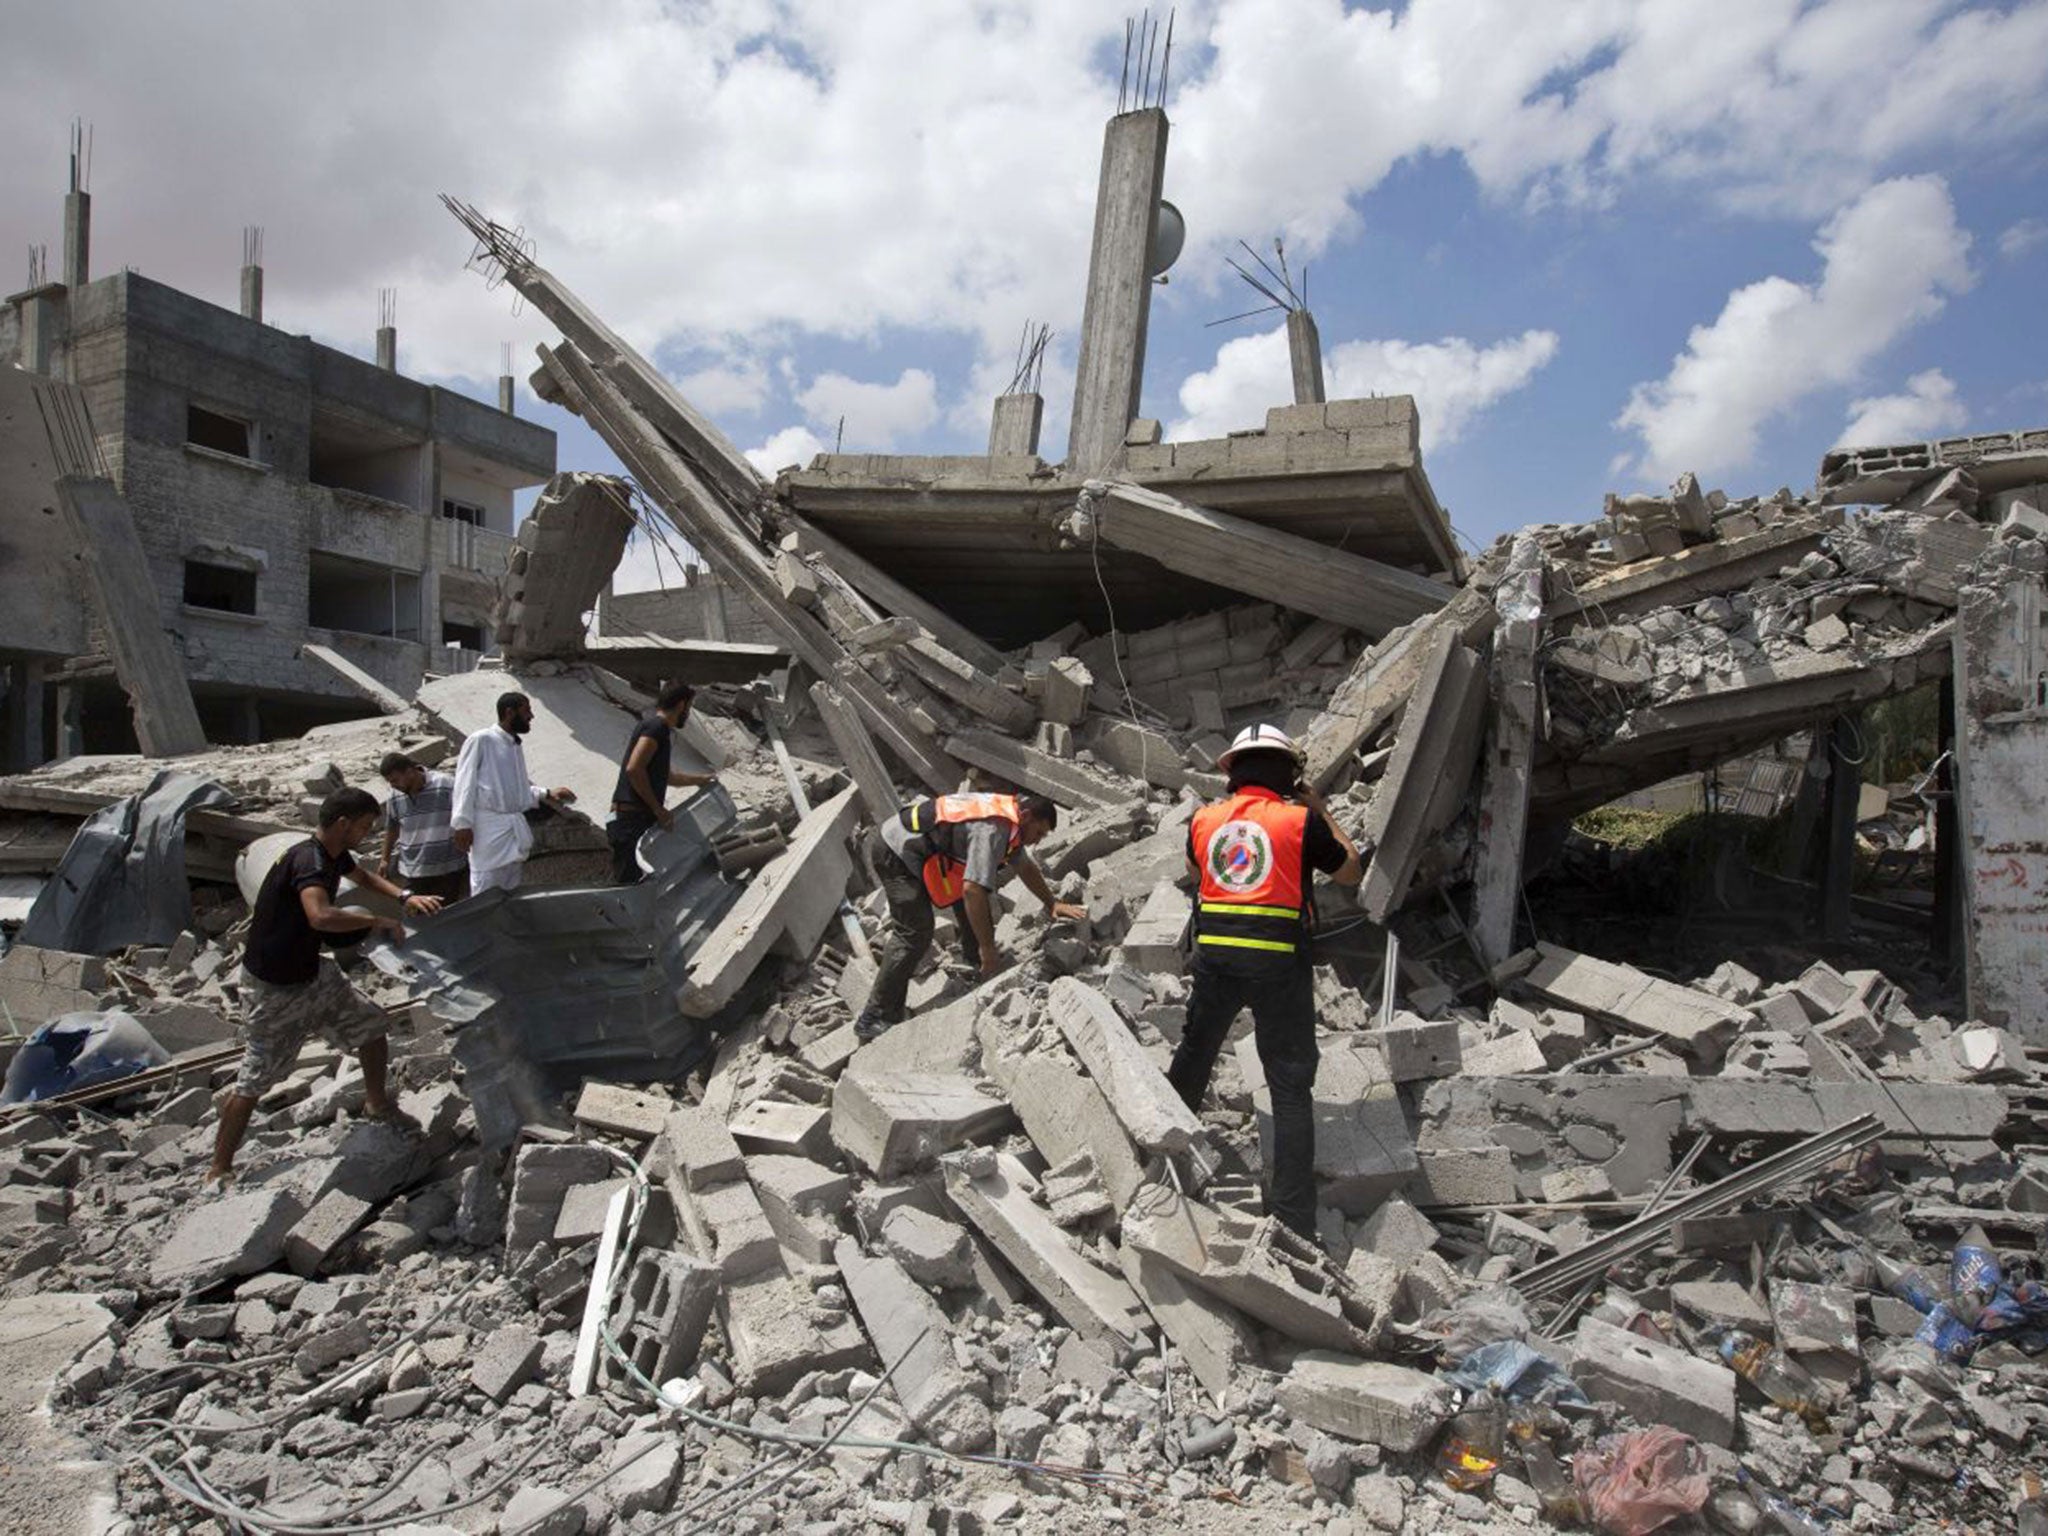 Rescue workers close to the Rafah refugee camp, where the entrance to a UN school was bombed on Sunday